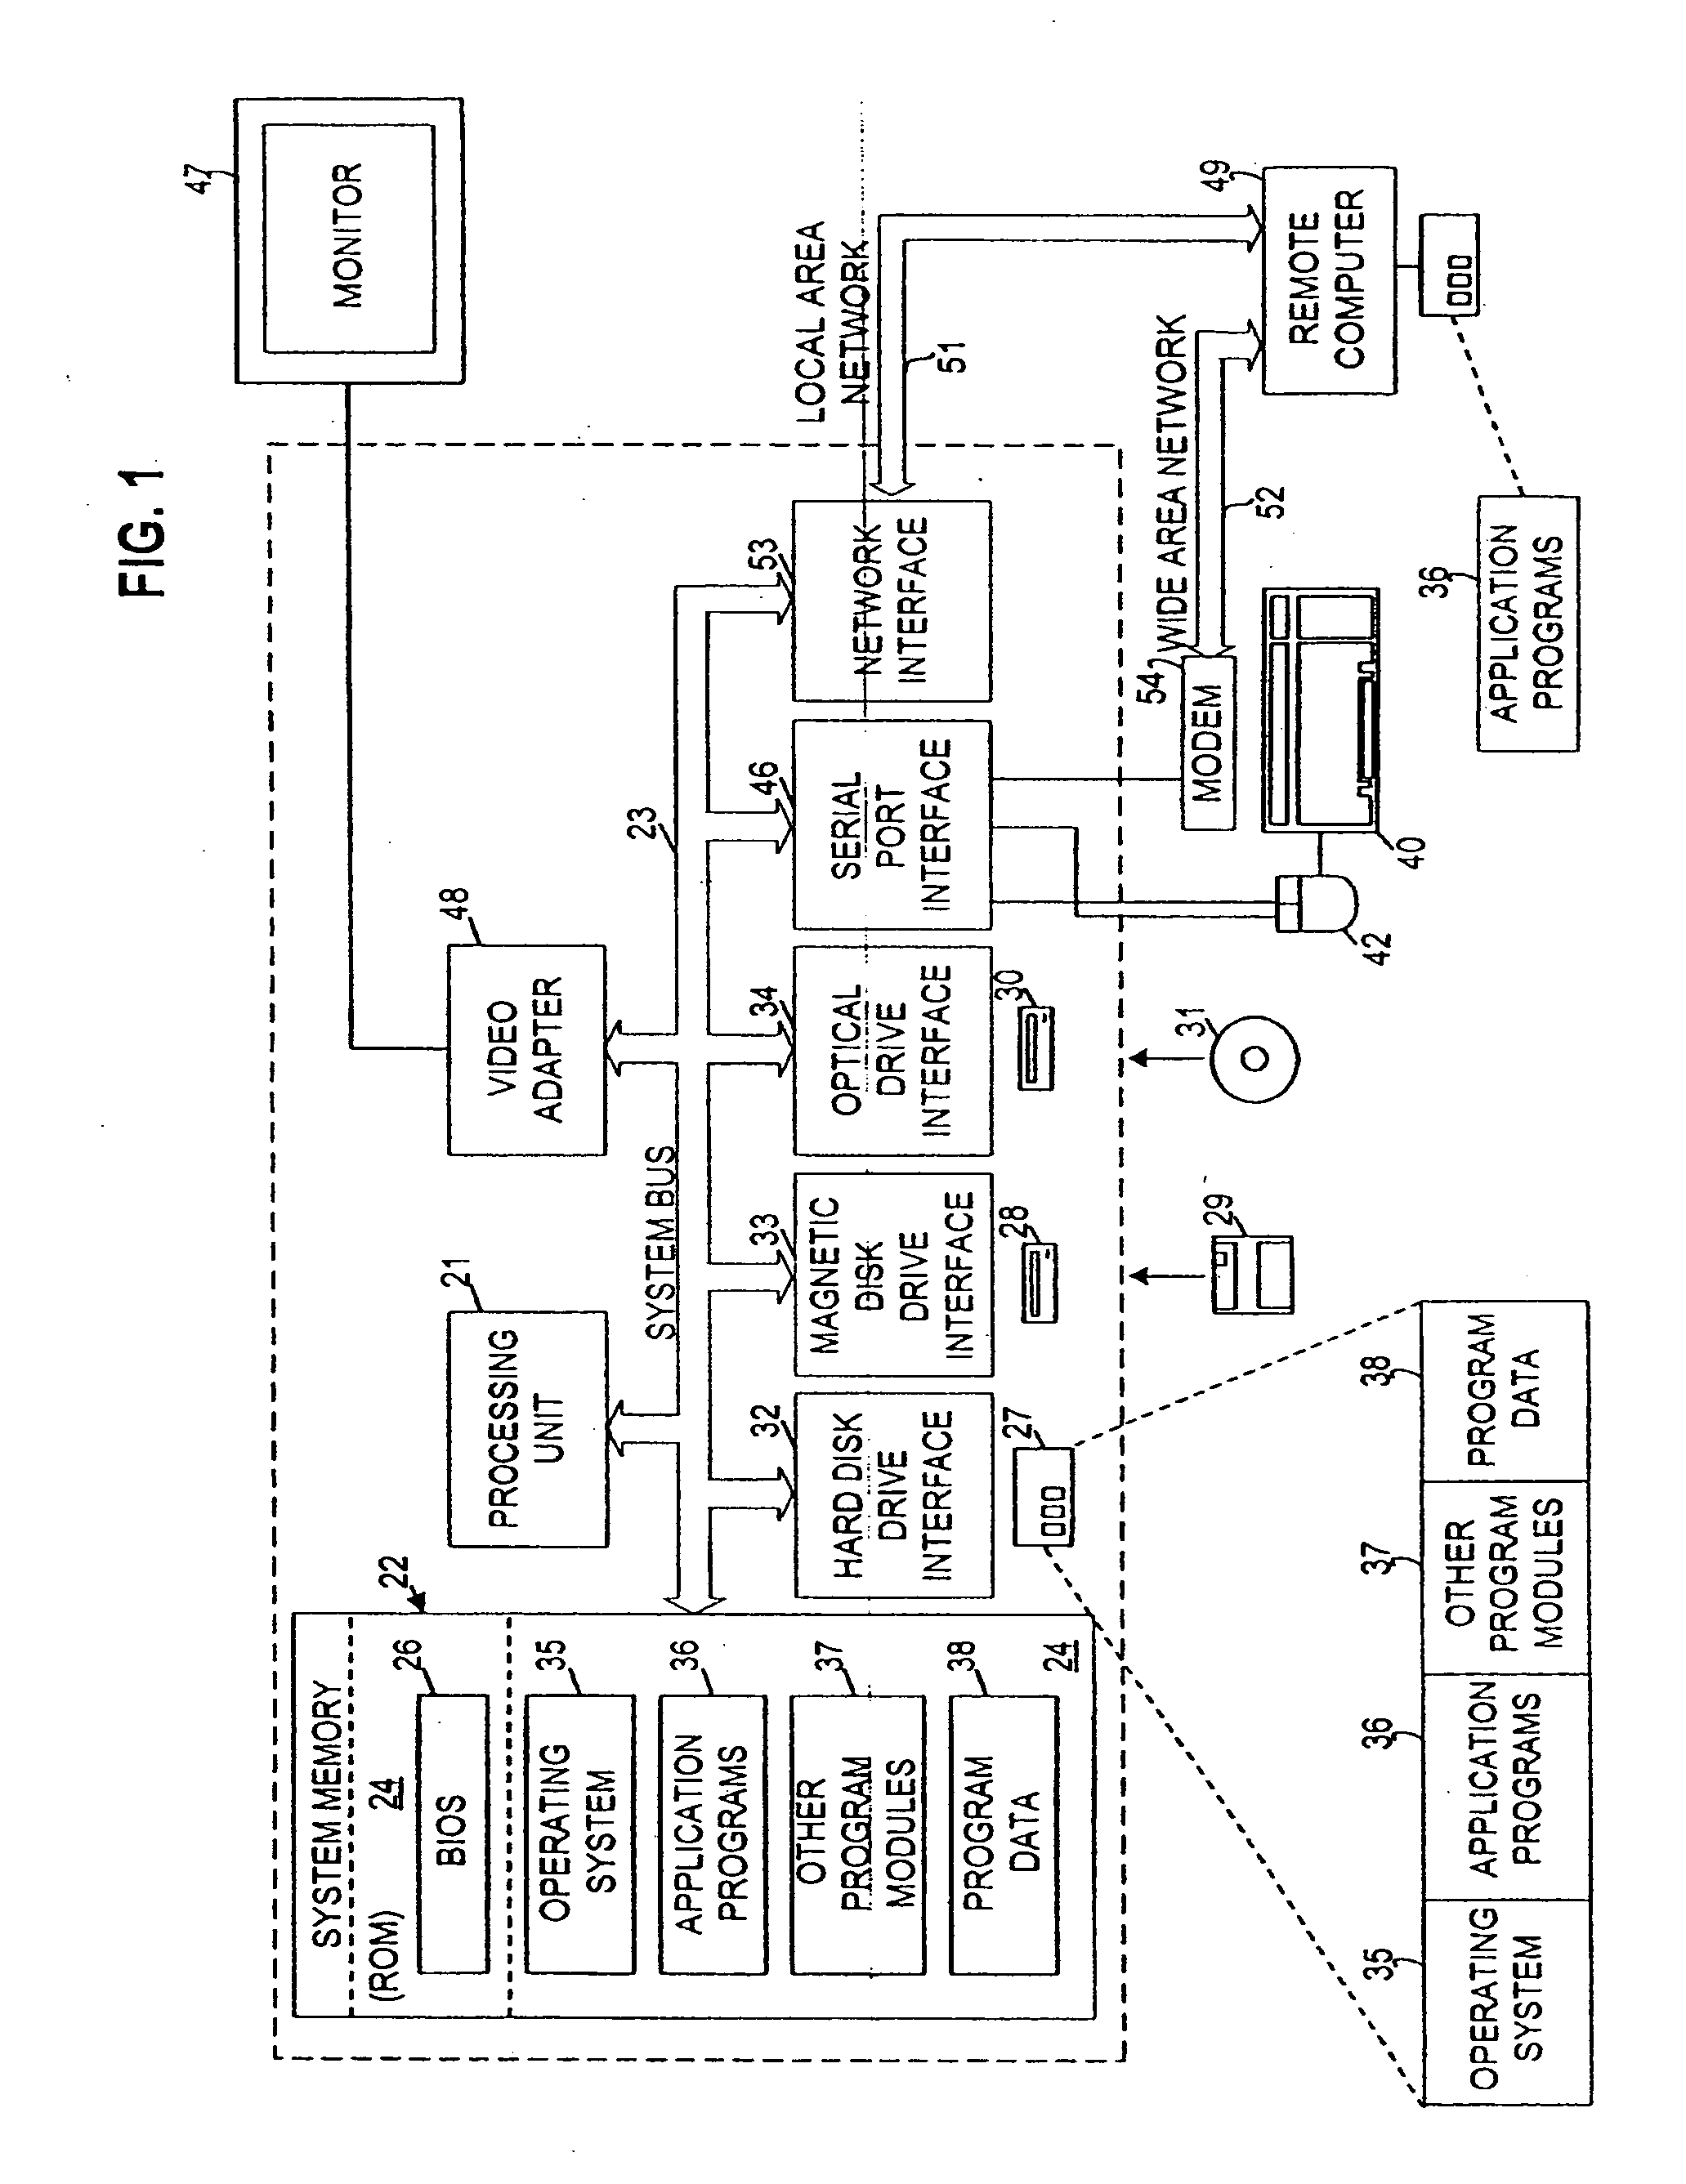 Methods for routing items for communications based on a measure of criticality